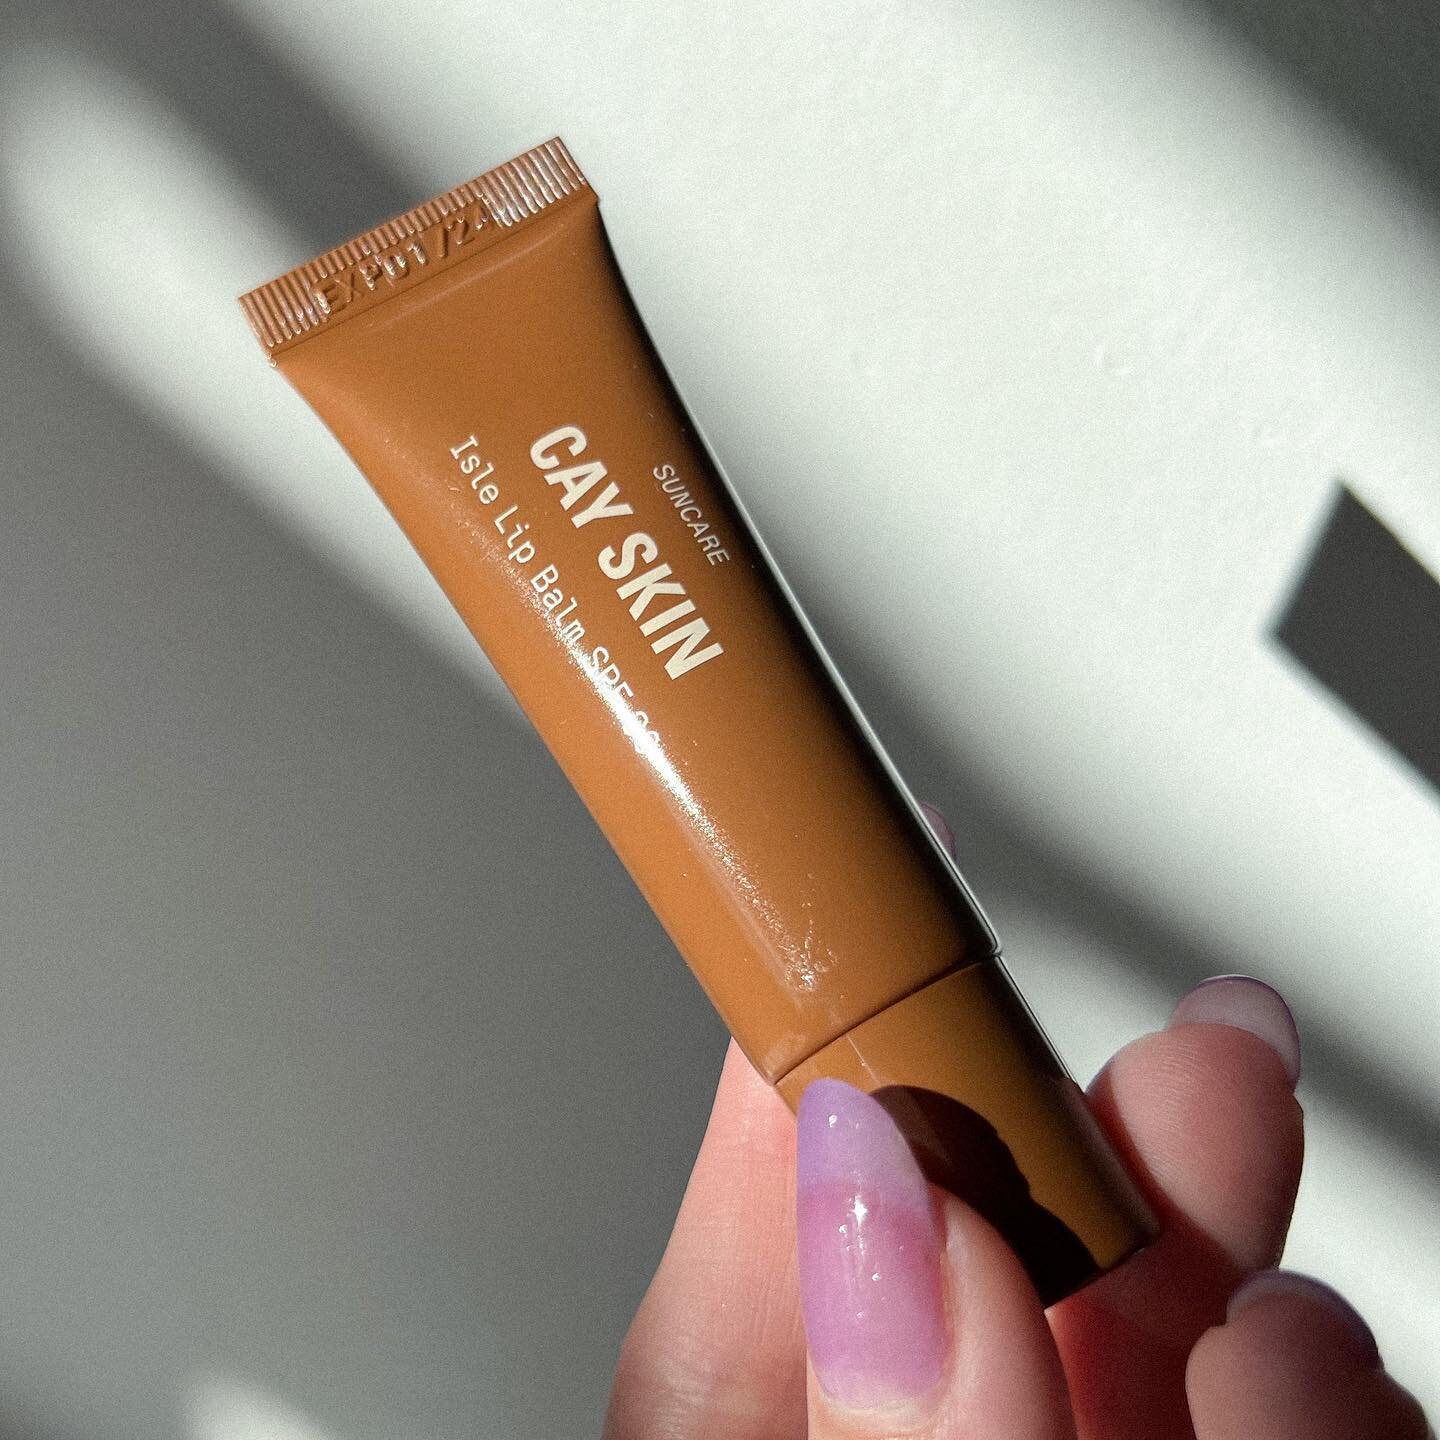 summer essential

I bought this on a whim during the last @sephora sale and I am so glad that I did! It feels so good on the lips and the applicator is a rubber texture that doesn&rsquo;t seem to collect product as much after use than others, which i